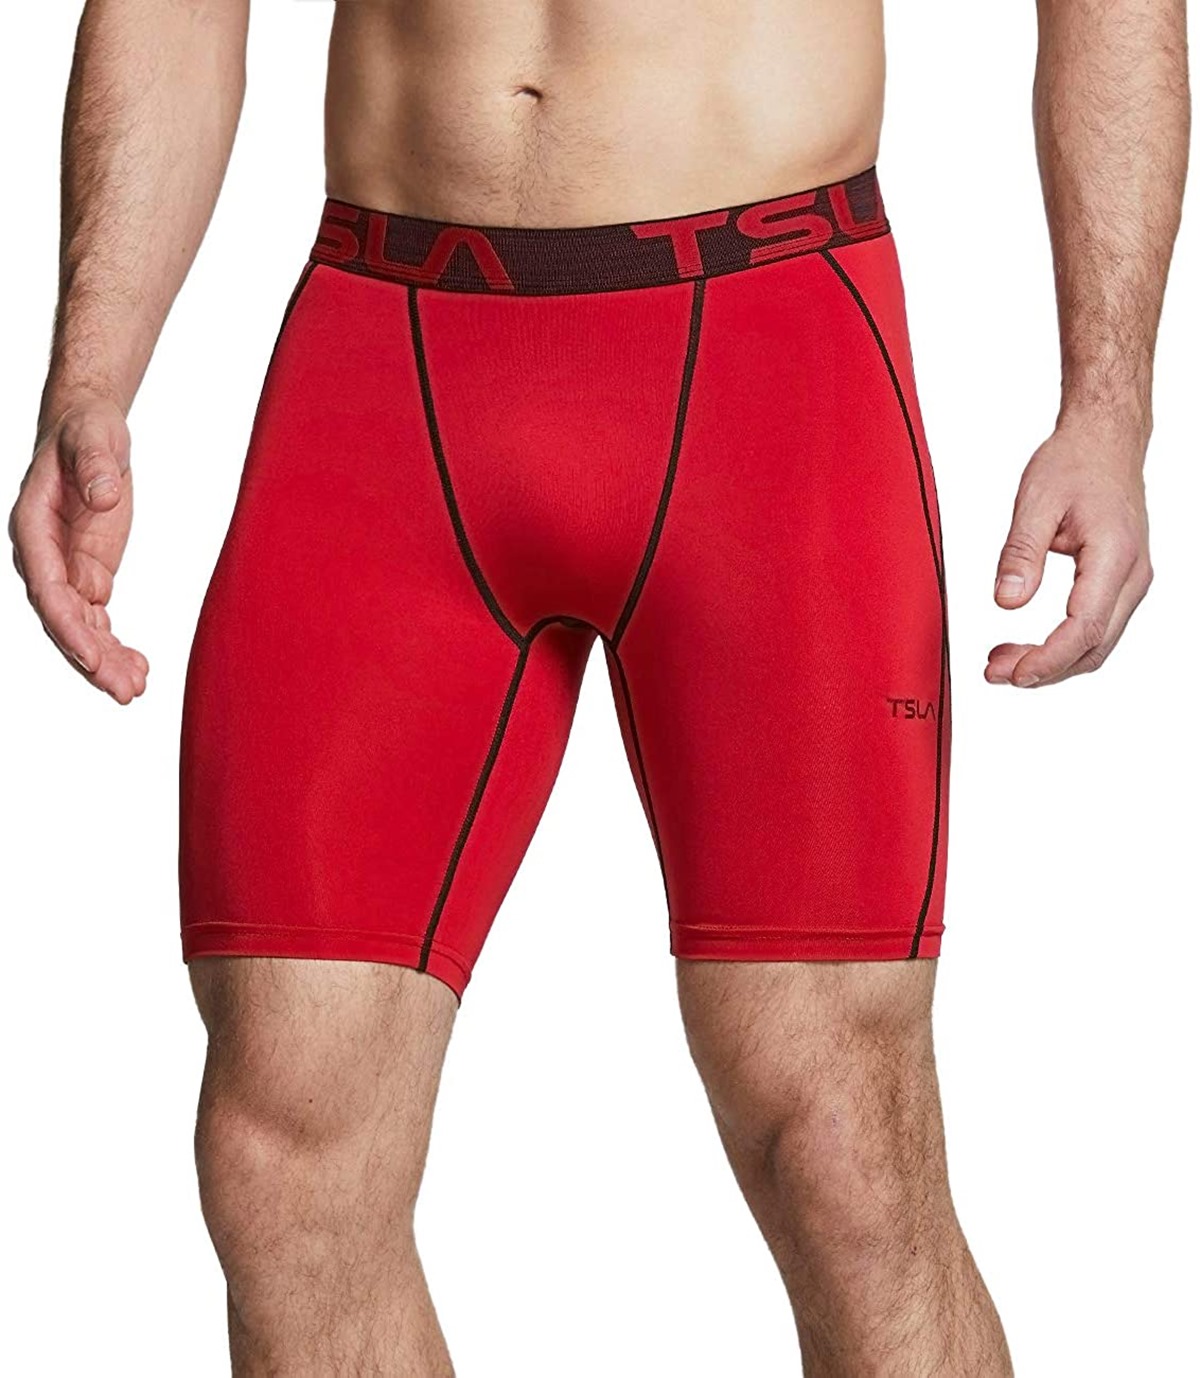 13 Incredible TSLA Men’s Compression Shorts For 2023